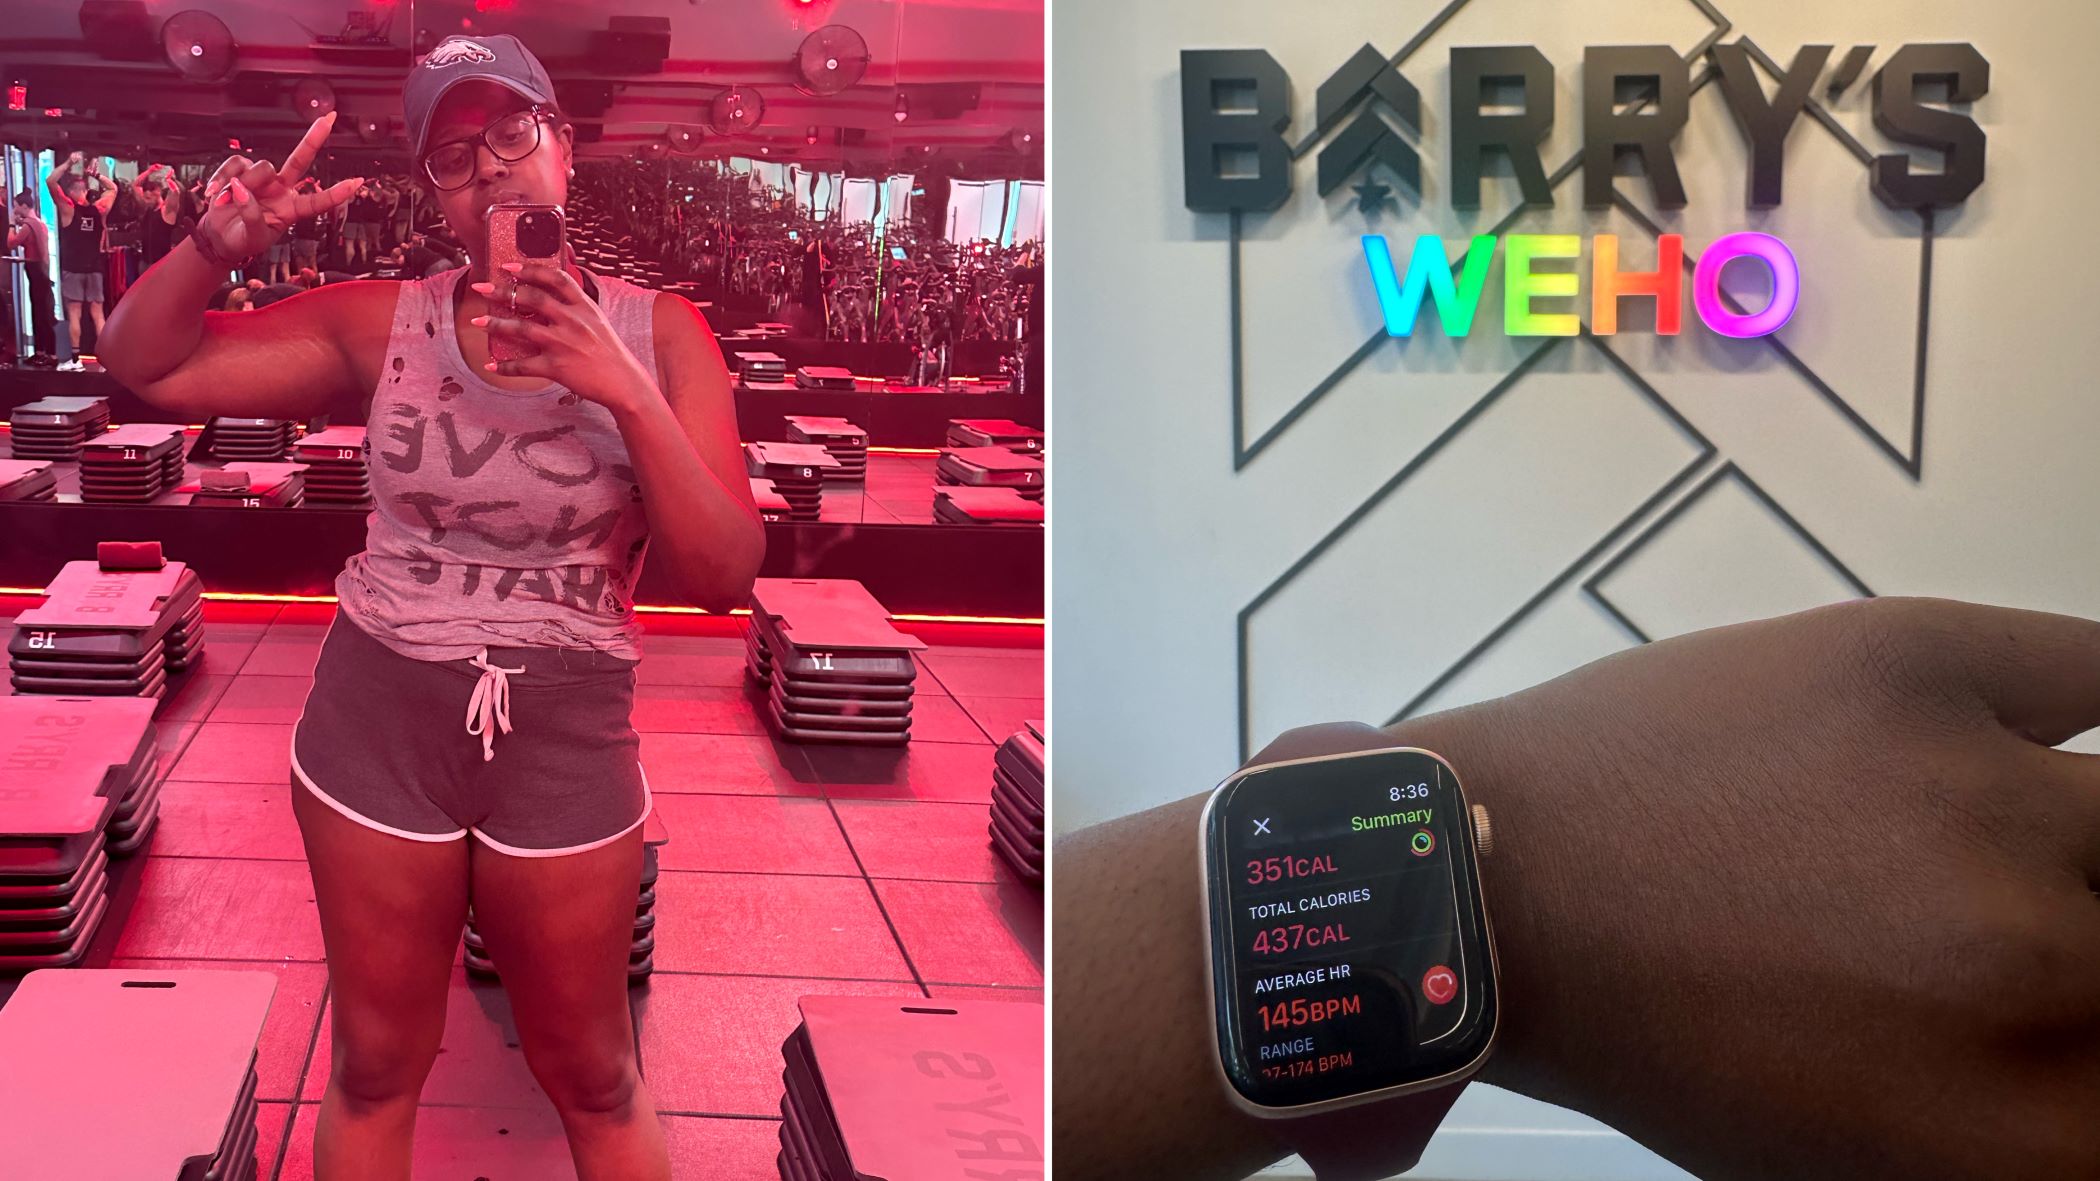 An image of lifestyle blogger Ariel posing after her Ride x Lift Class at Barry's WeHo. The next image is of her vitals on her Apple Watch.